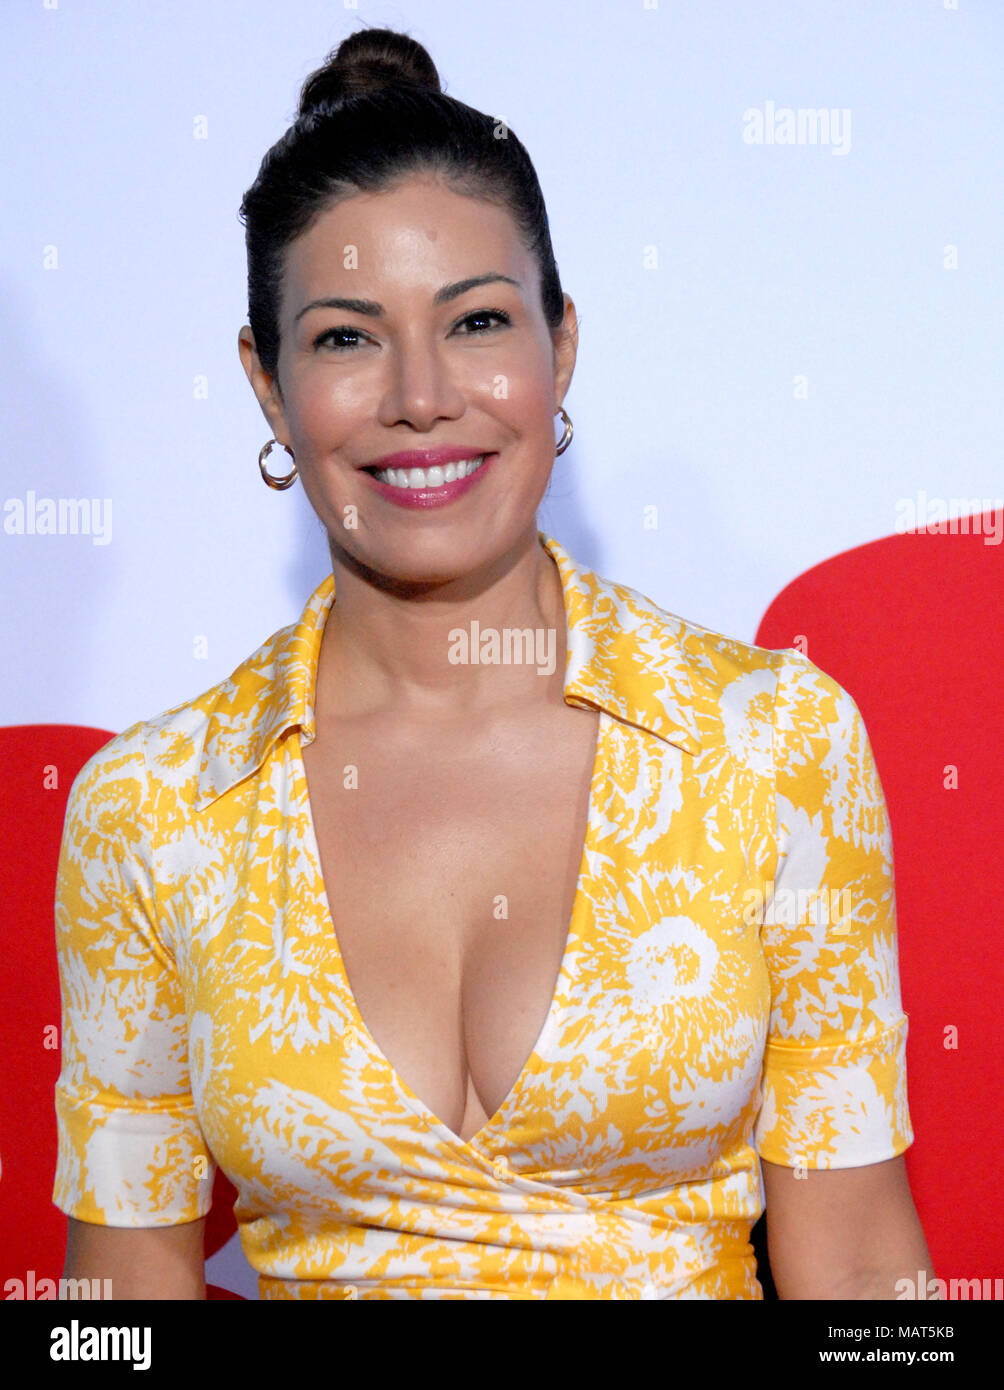 WESTWOOD, CA - APRIL 03: Actress Iris Almario attends the premiere of Universal Pictures' 'Blockers' at Regency Village Theatre on April 3, 2018 in Westwood, California. Stock Photo